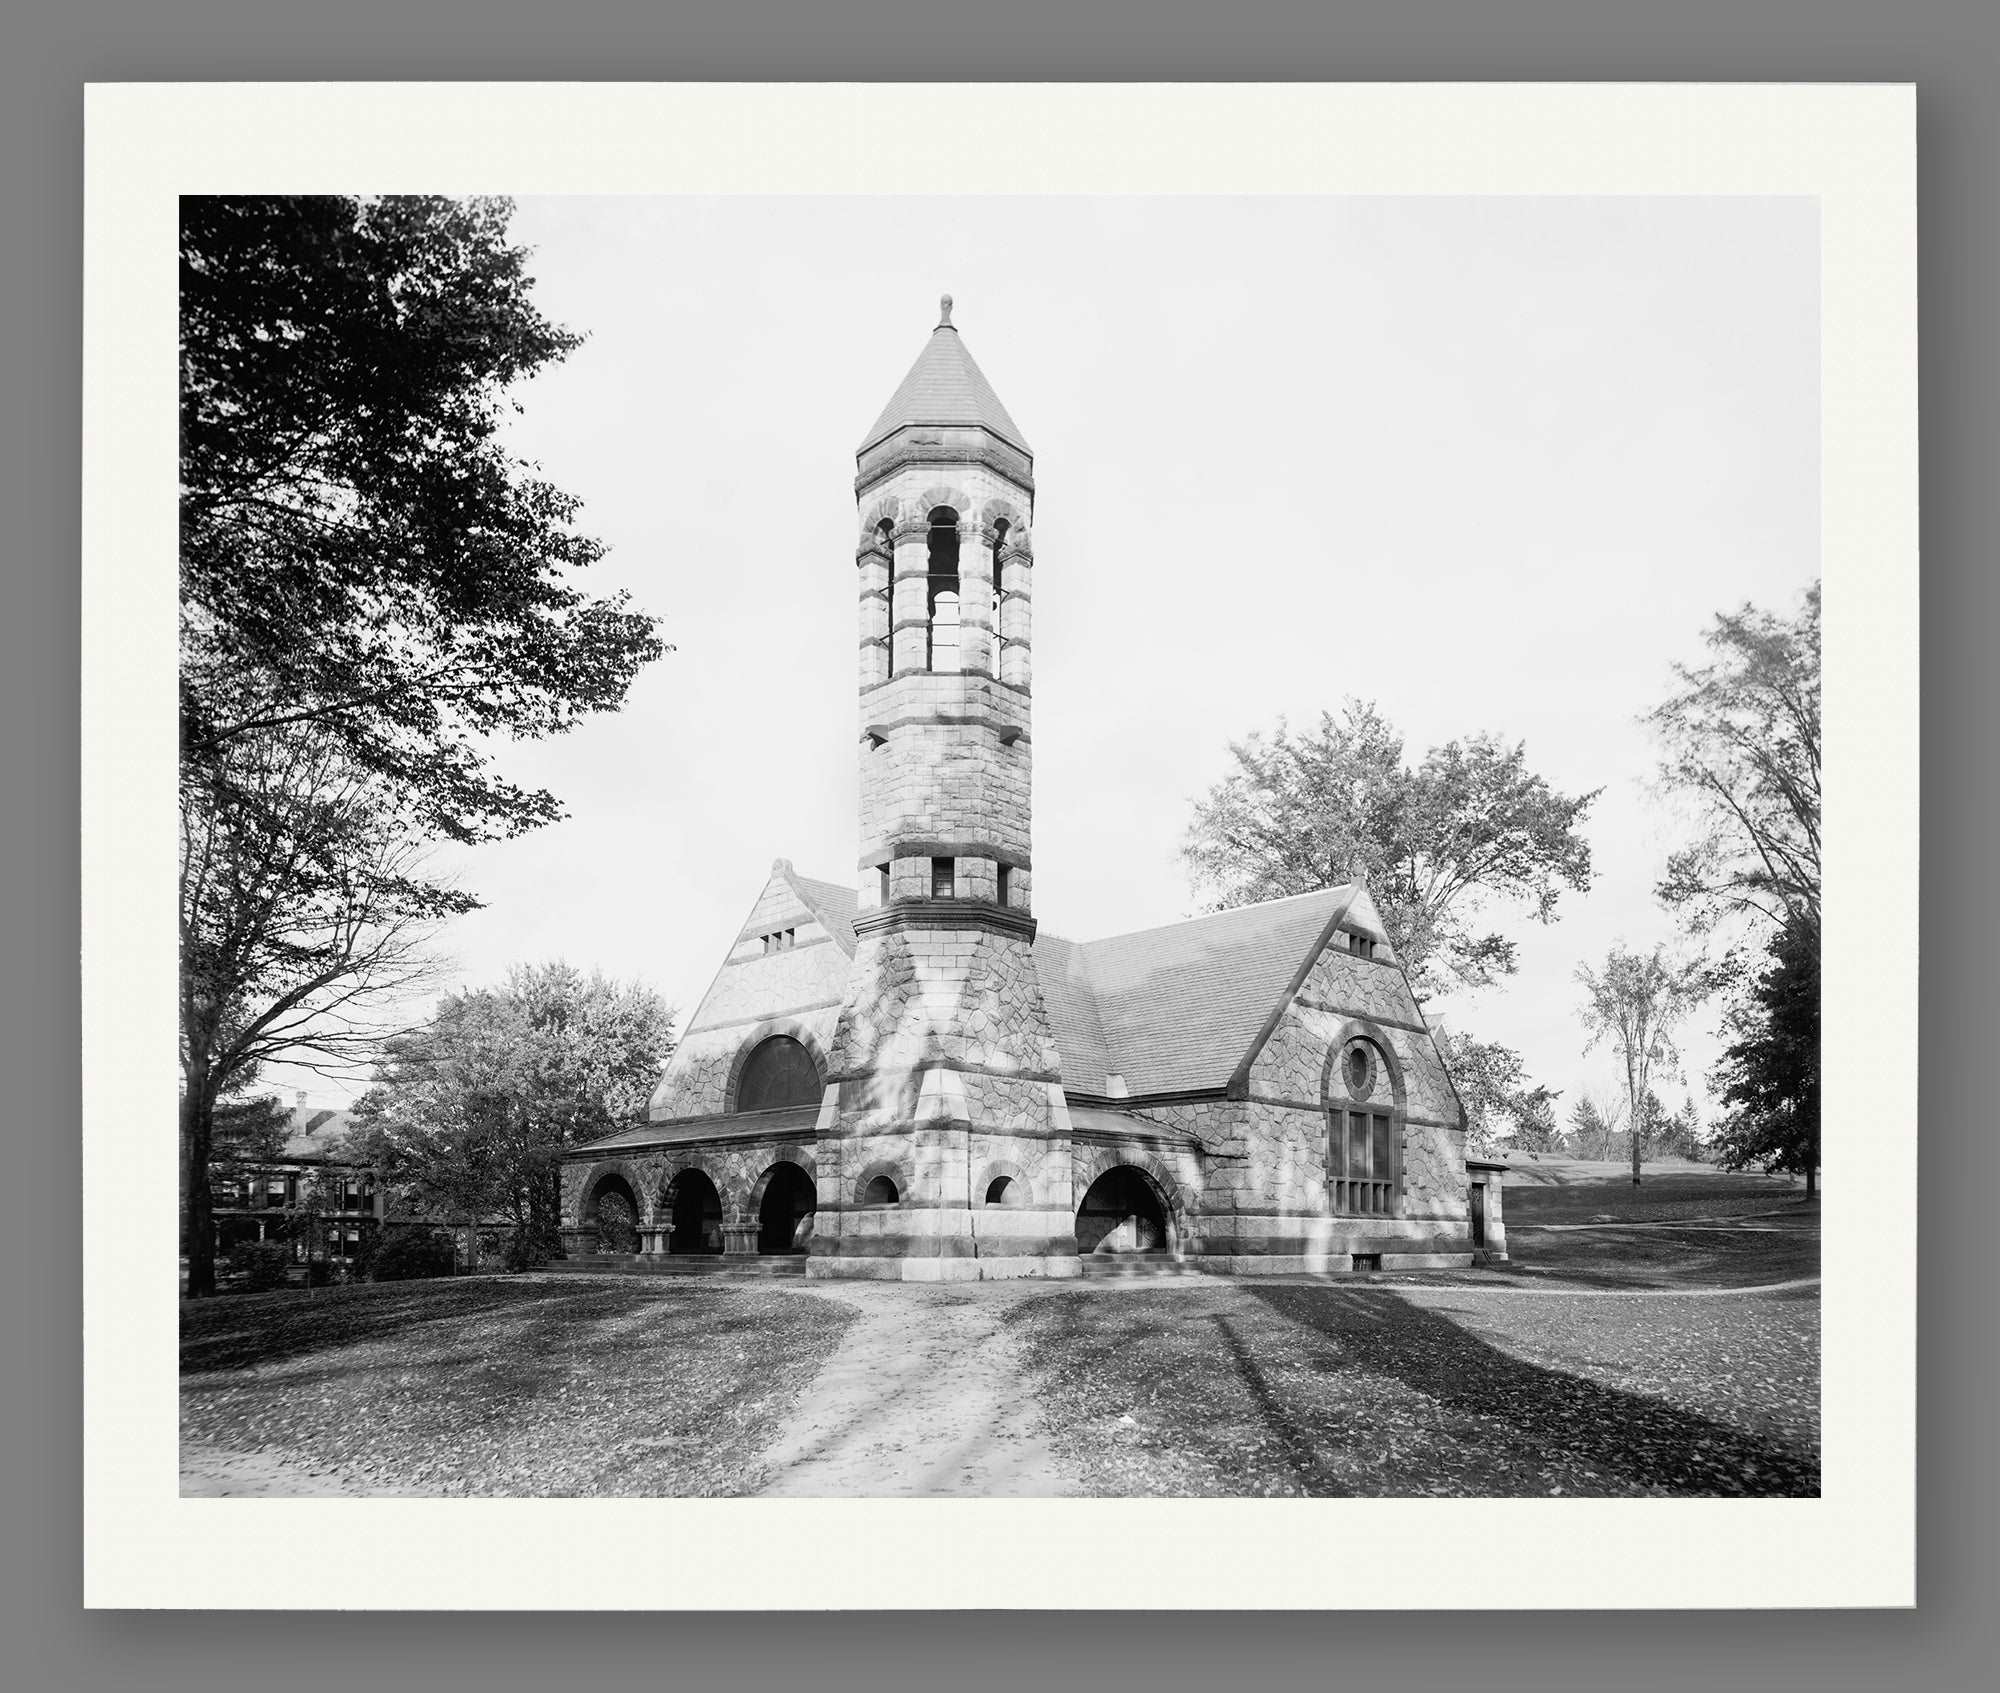 A fine art paper print of a vintage photograph of Dartmouth College